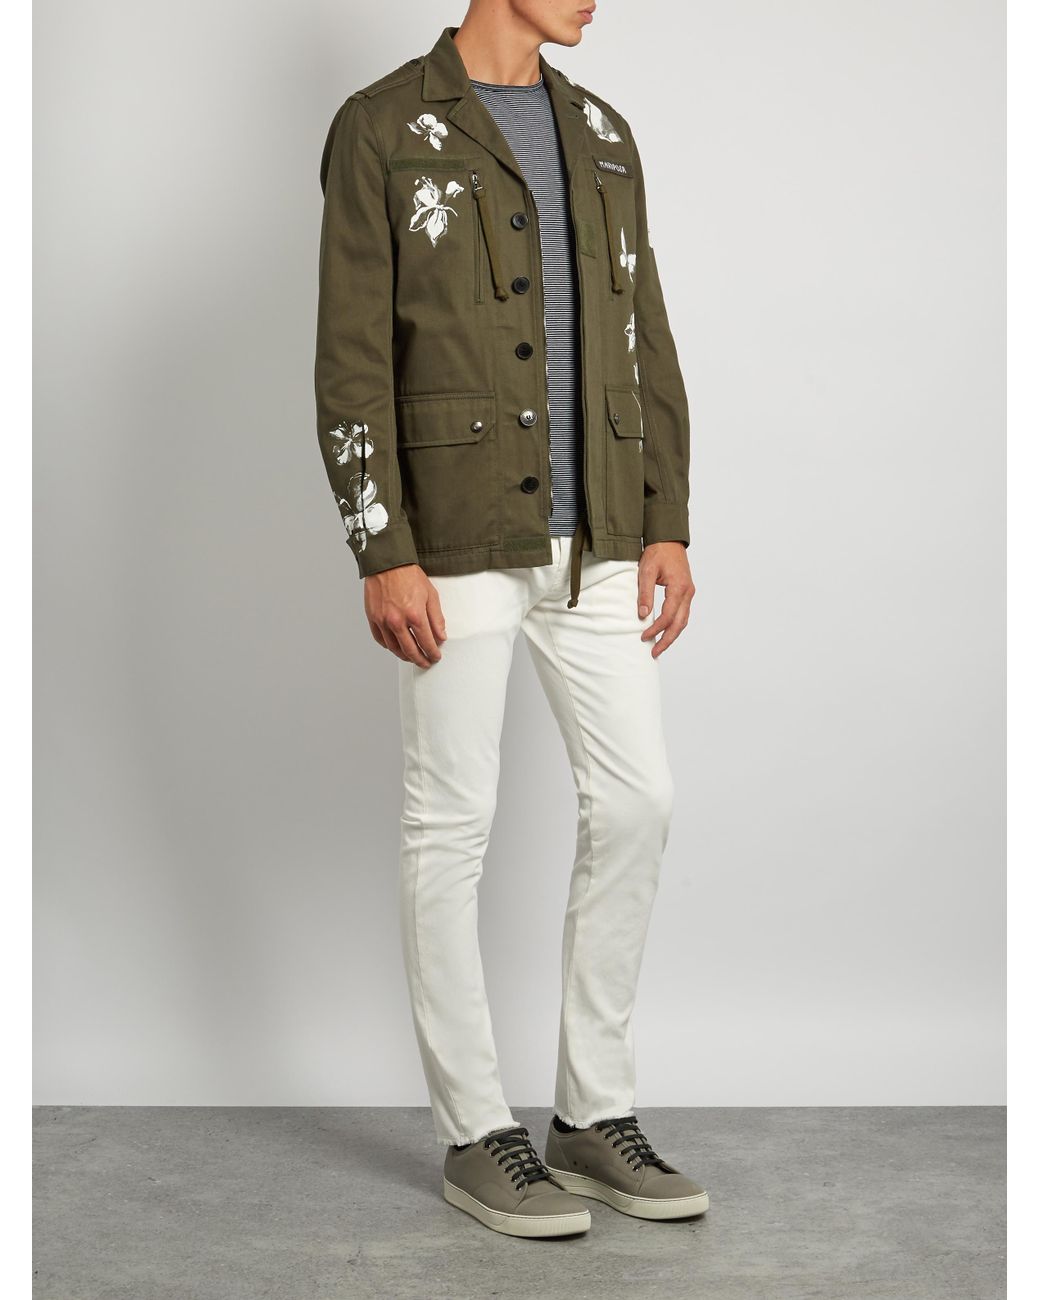 Valentino Mariposa Cotton Jacket in Green for Men | Lyst